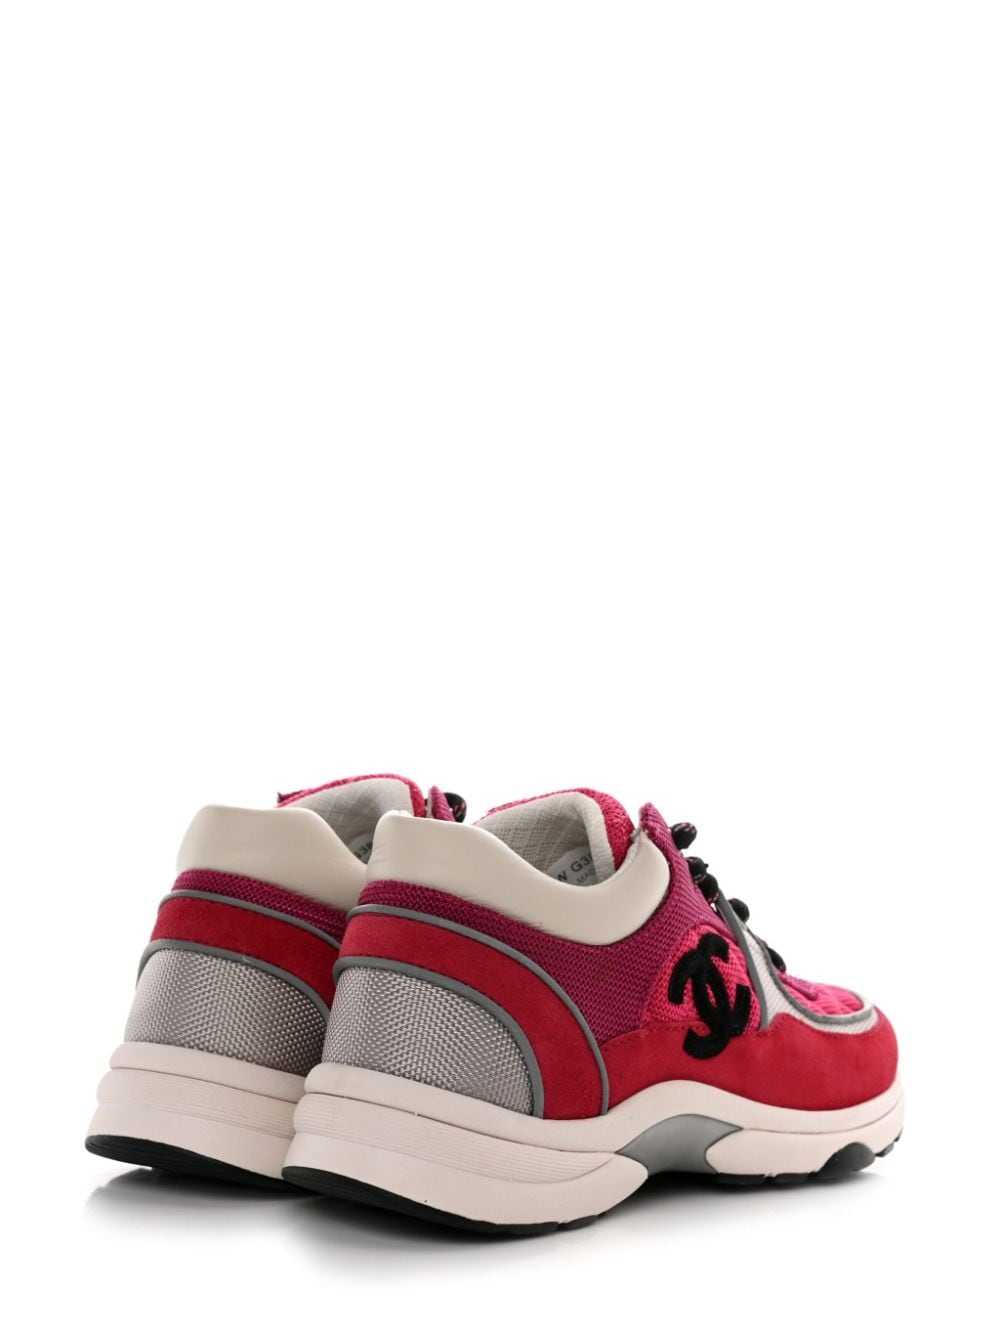 CHANEL Pre-Owned CC suede mesh sneakers - Pink - image 2